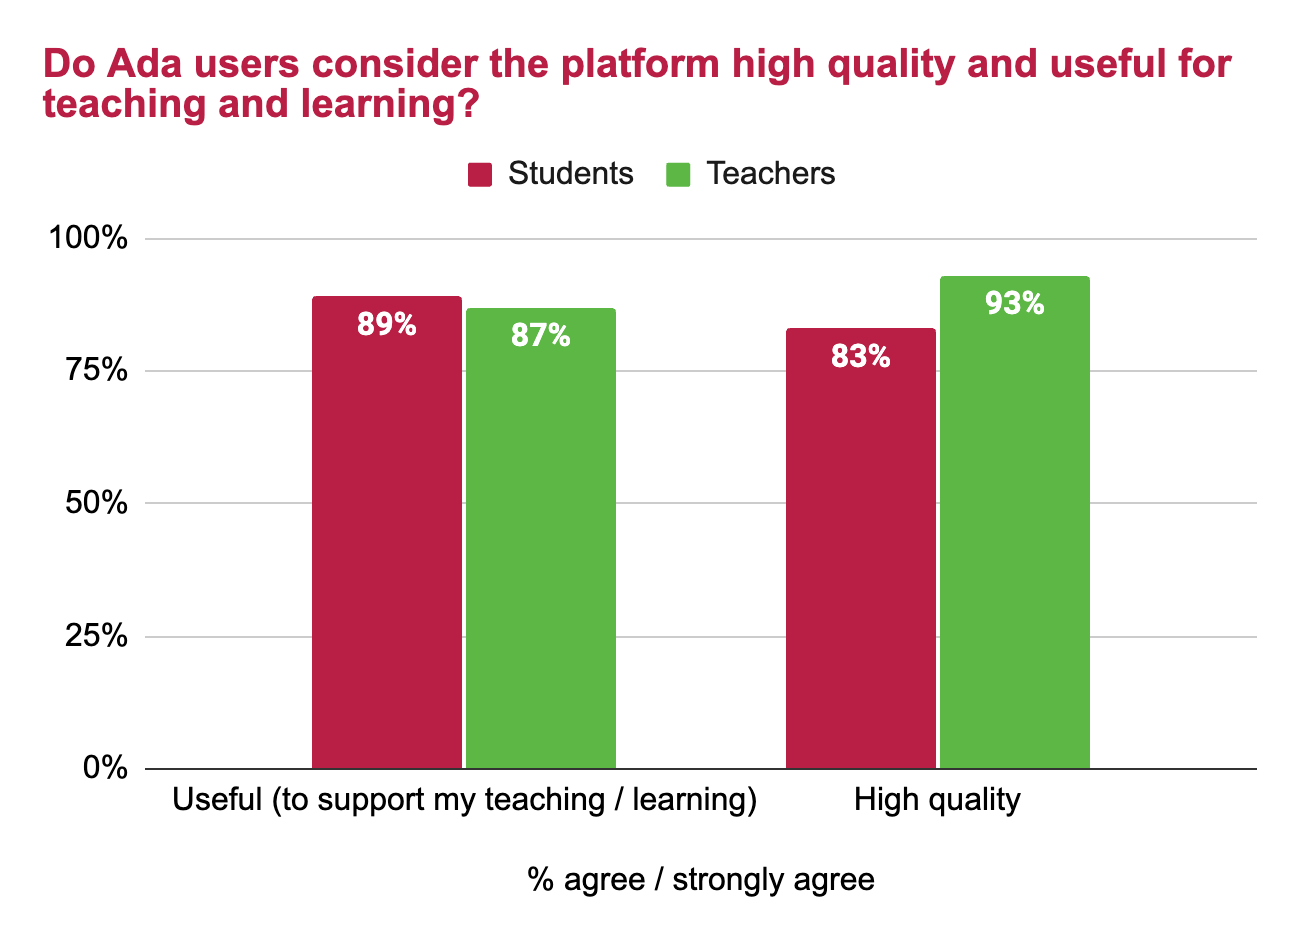 A graph showing that students and teachers consider Ada Computer Science to be useful and high quality.